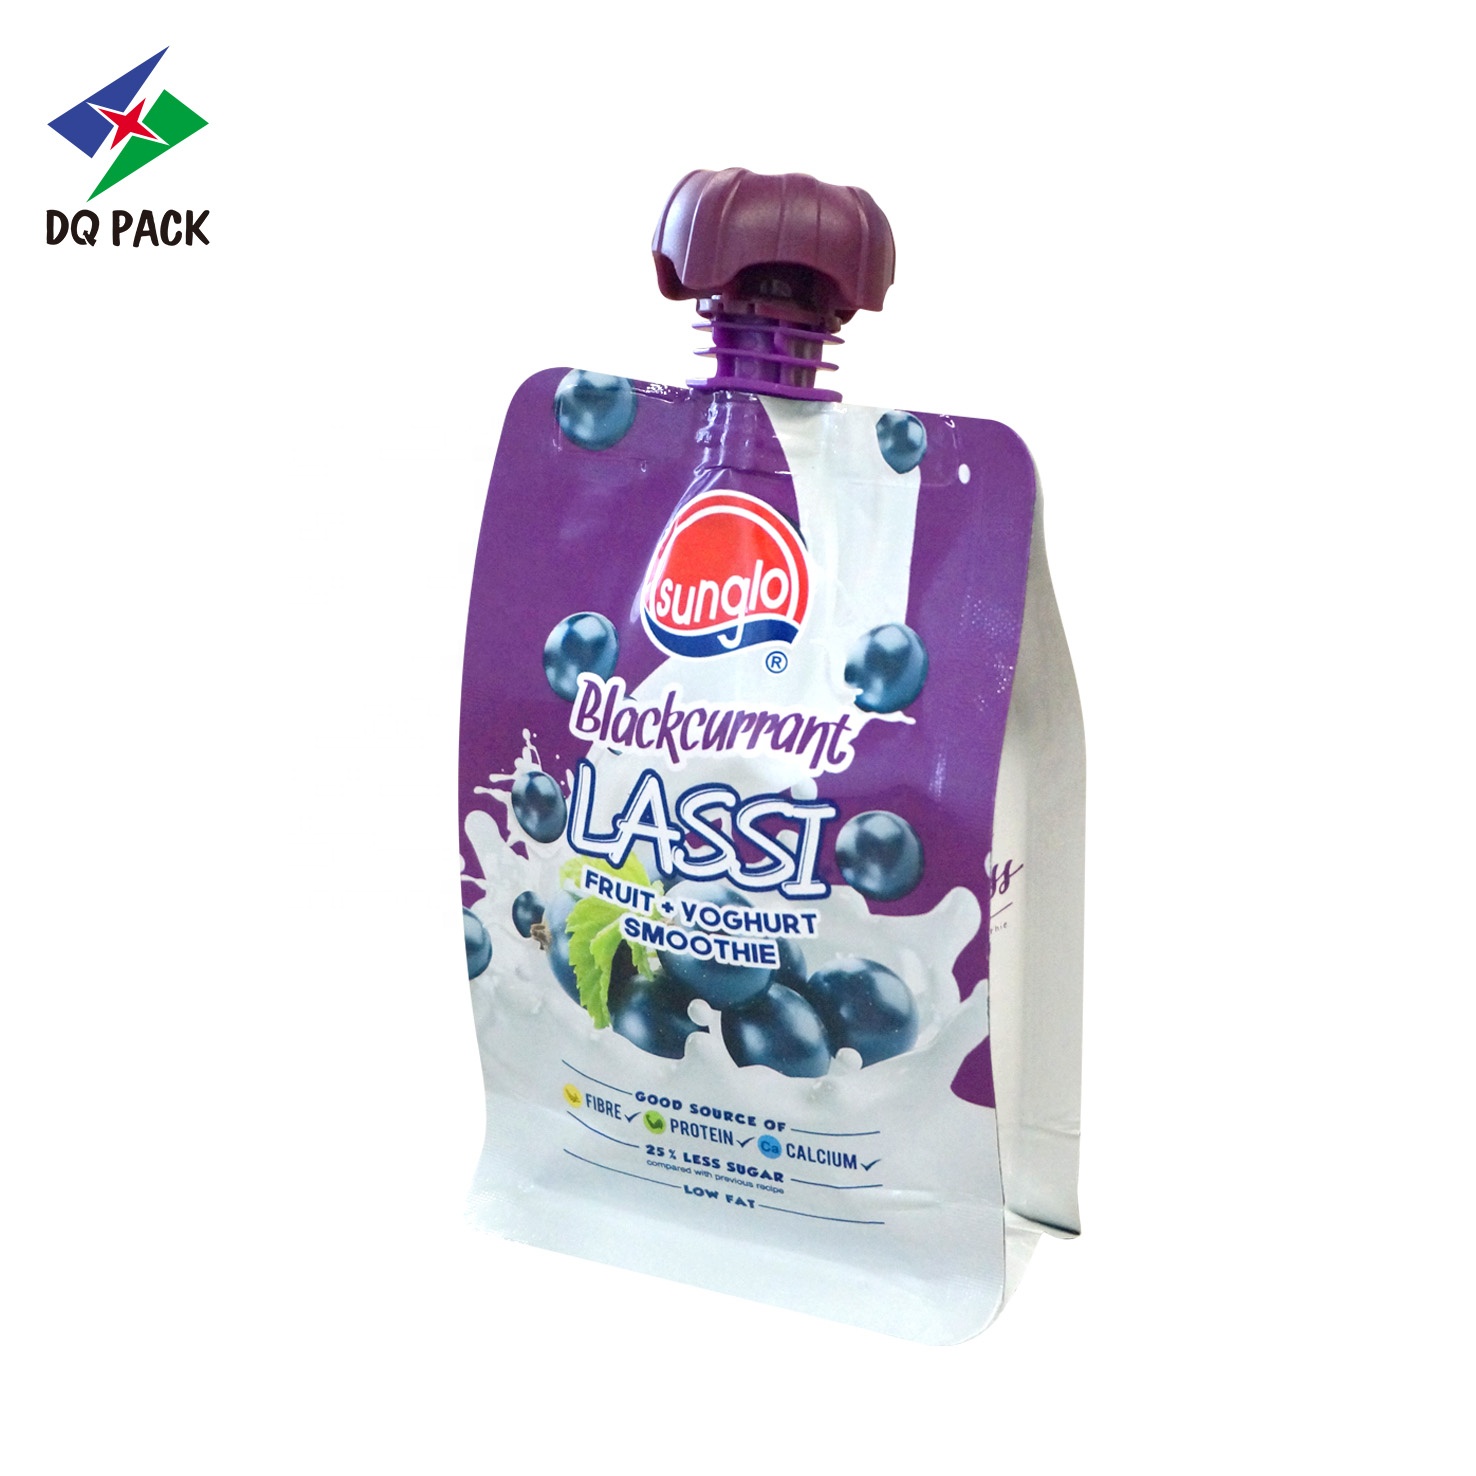 DQ PACK Custom Logo Hot eco friendly Flat Bottom Bag Stand Up Spout pouch bag liquid packaging suction nozzle bag